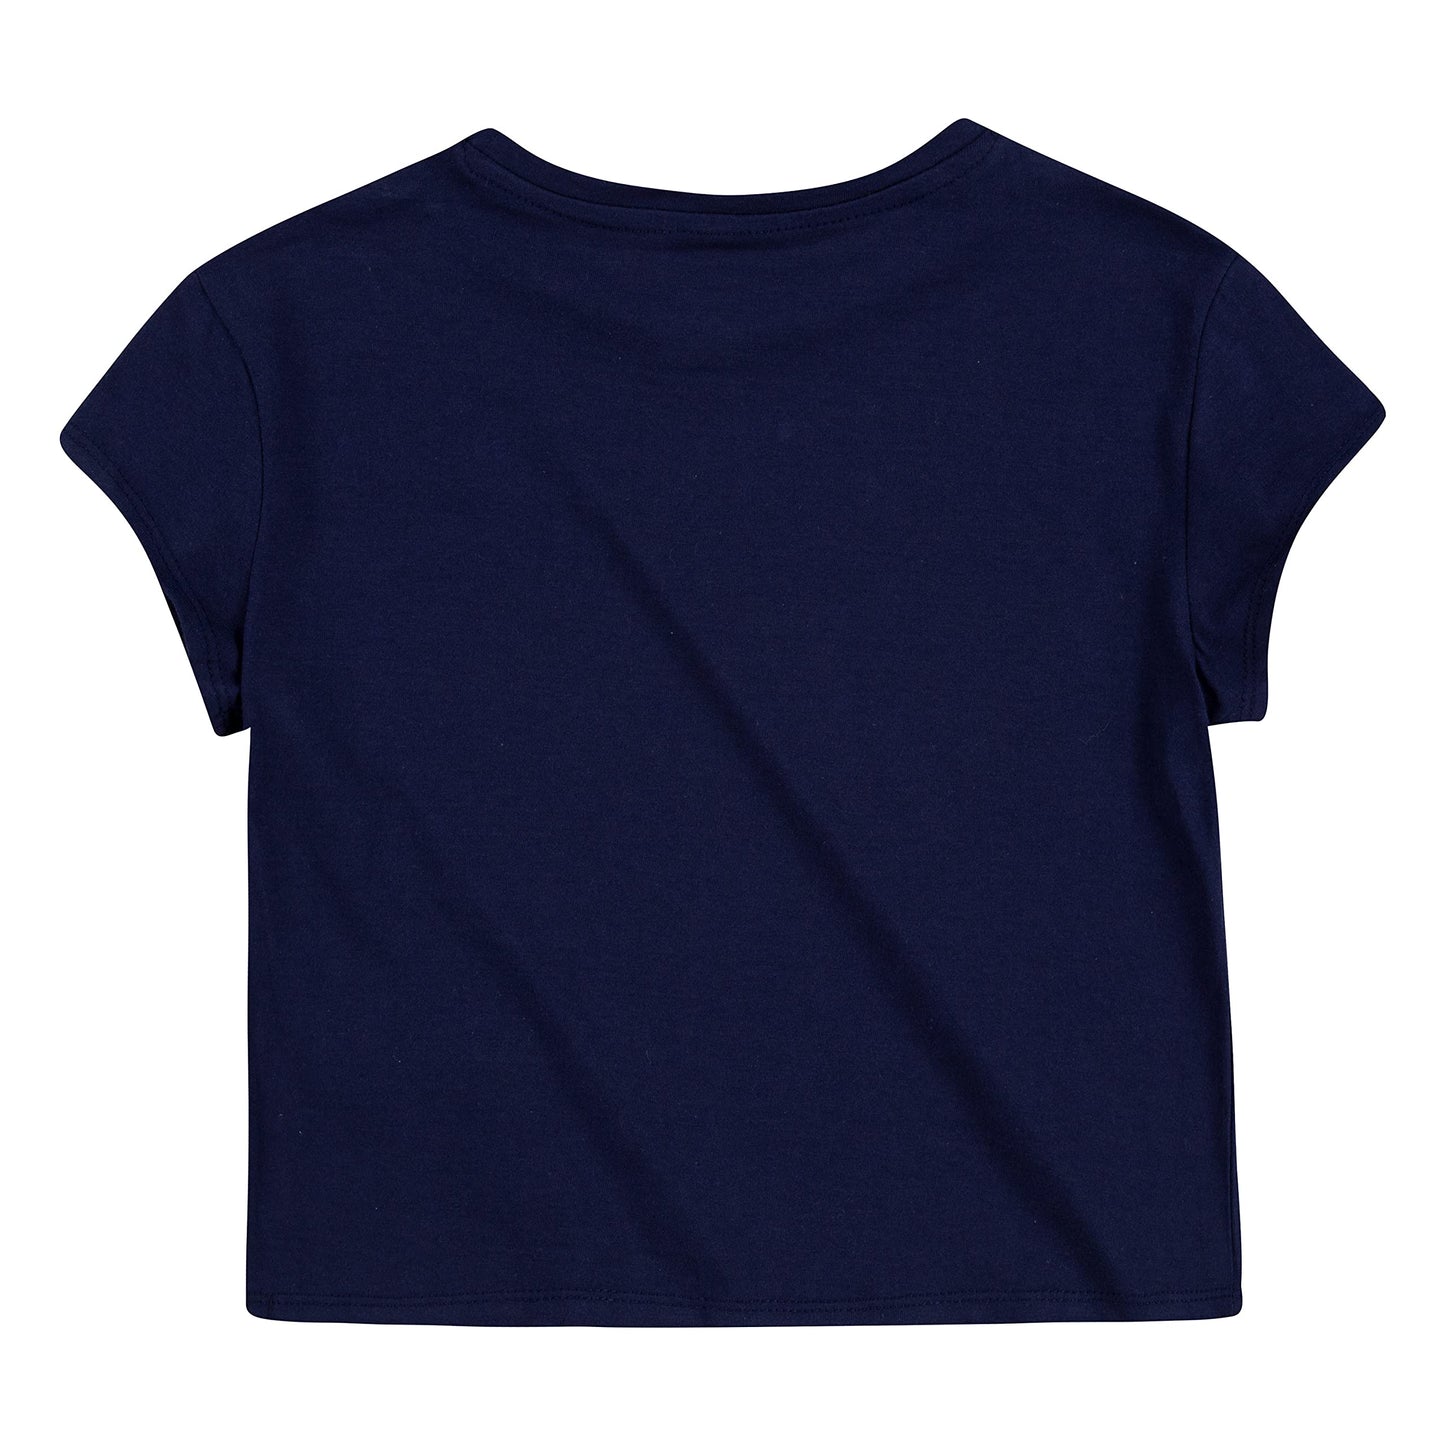 Image 2 of Dropped Shoulder Boxy Tee (Toddler)